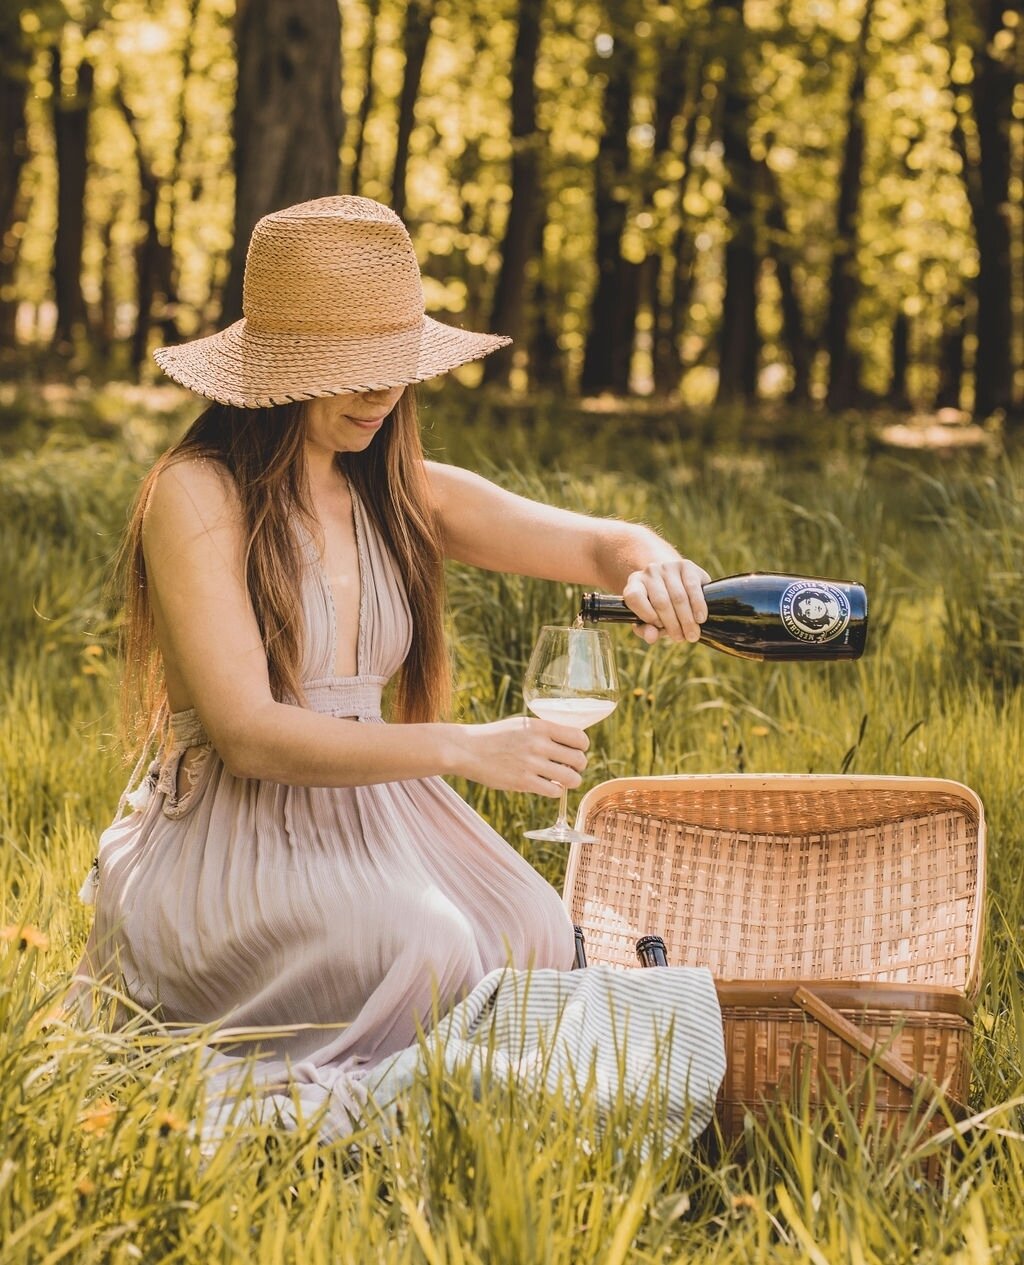 Beauty is in the eye of the beholder.. of the Glass! ⁠
⁠
*Must be 21+ to Sip Sip Hooray. ⁠
⁠
⁠
#merchantsdaugtherhardcider #hudsonvalley #nycider  #pickcider #ciderlover #merchantsdaughter #outdoors #nature #beauty #picnic #wineglass #drinks #moments